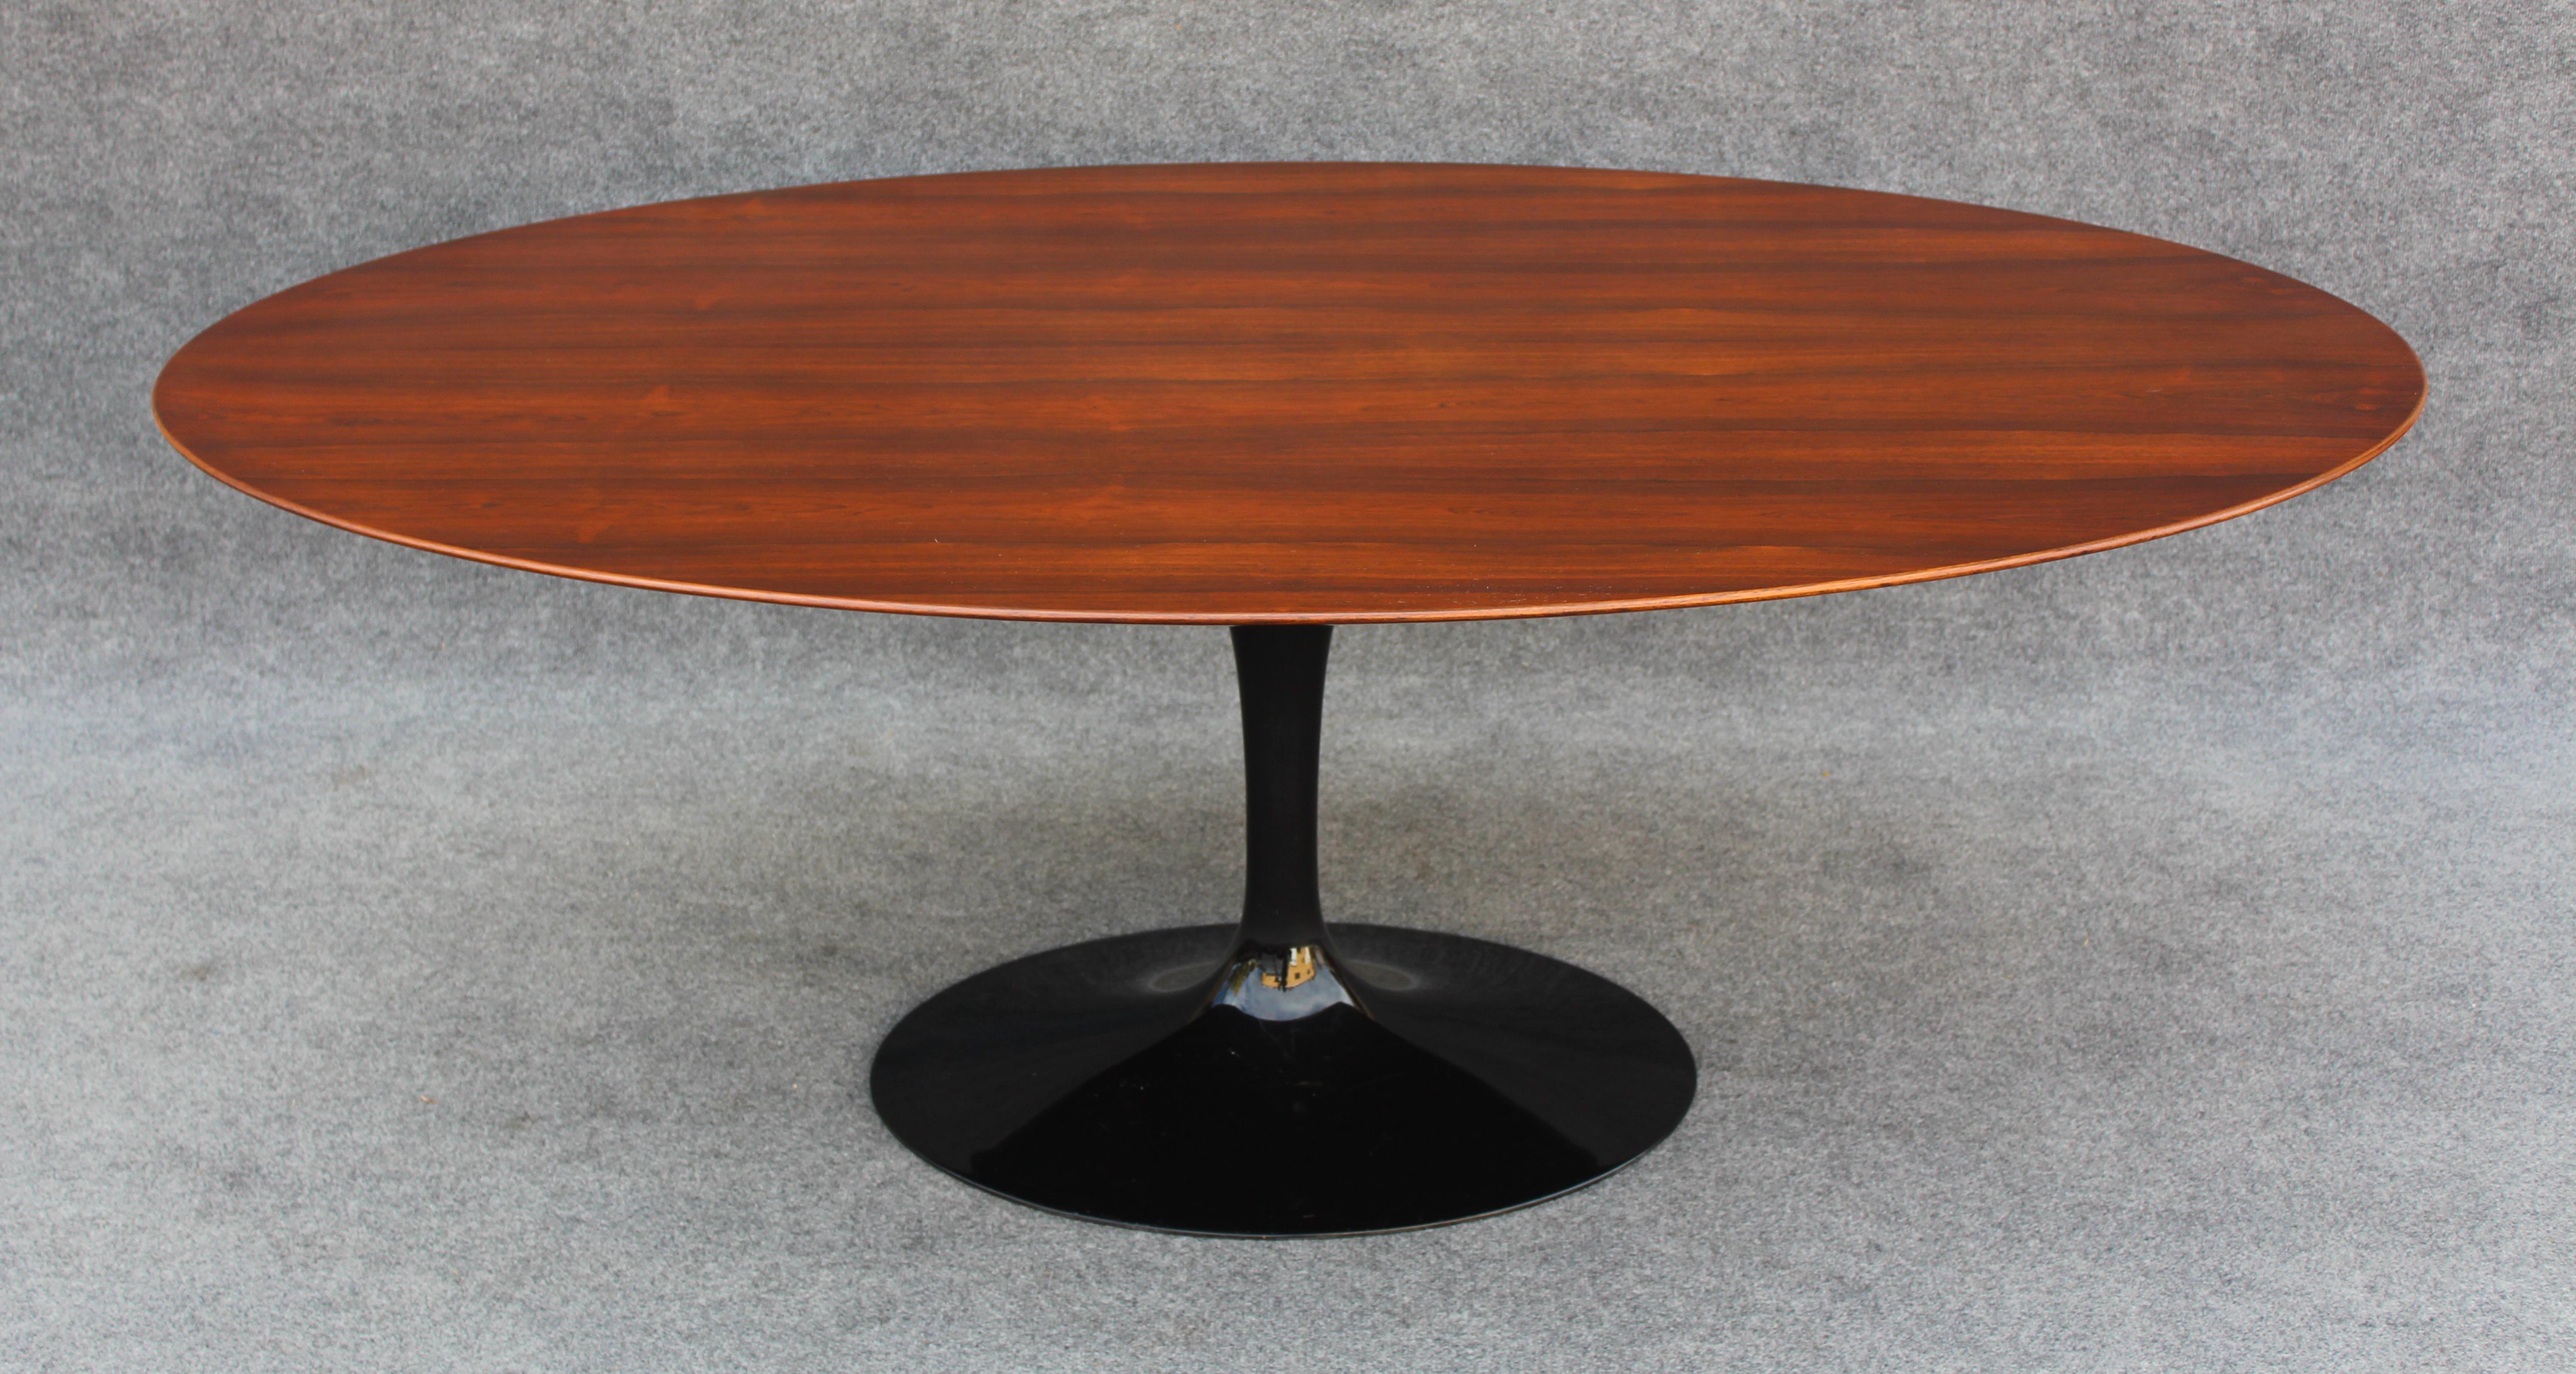 This rare and exquisite table was designed by legend Eero Saarinen for Knoll. Featuring a rare top, this oval top is made of Brazilian rosewood, which is beautifully figured and bookmatched. This is real rosewood, as Brazilian rosewood is now banned